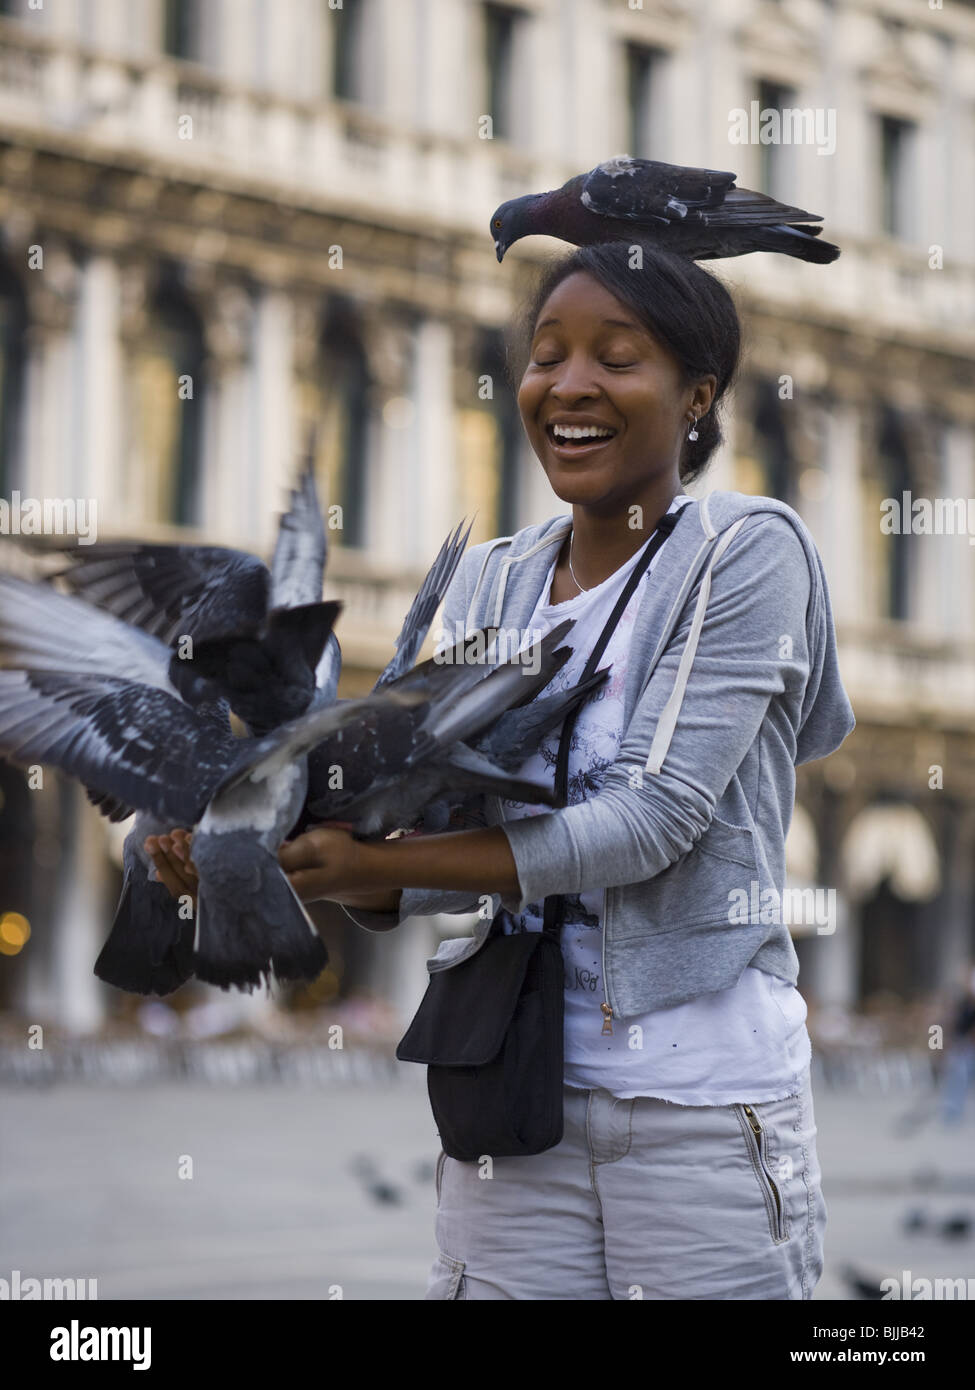 Woman in square with pigeon on head smiling Stock Photo